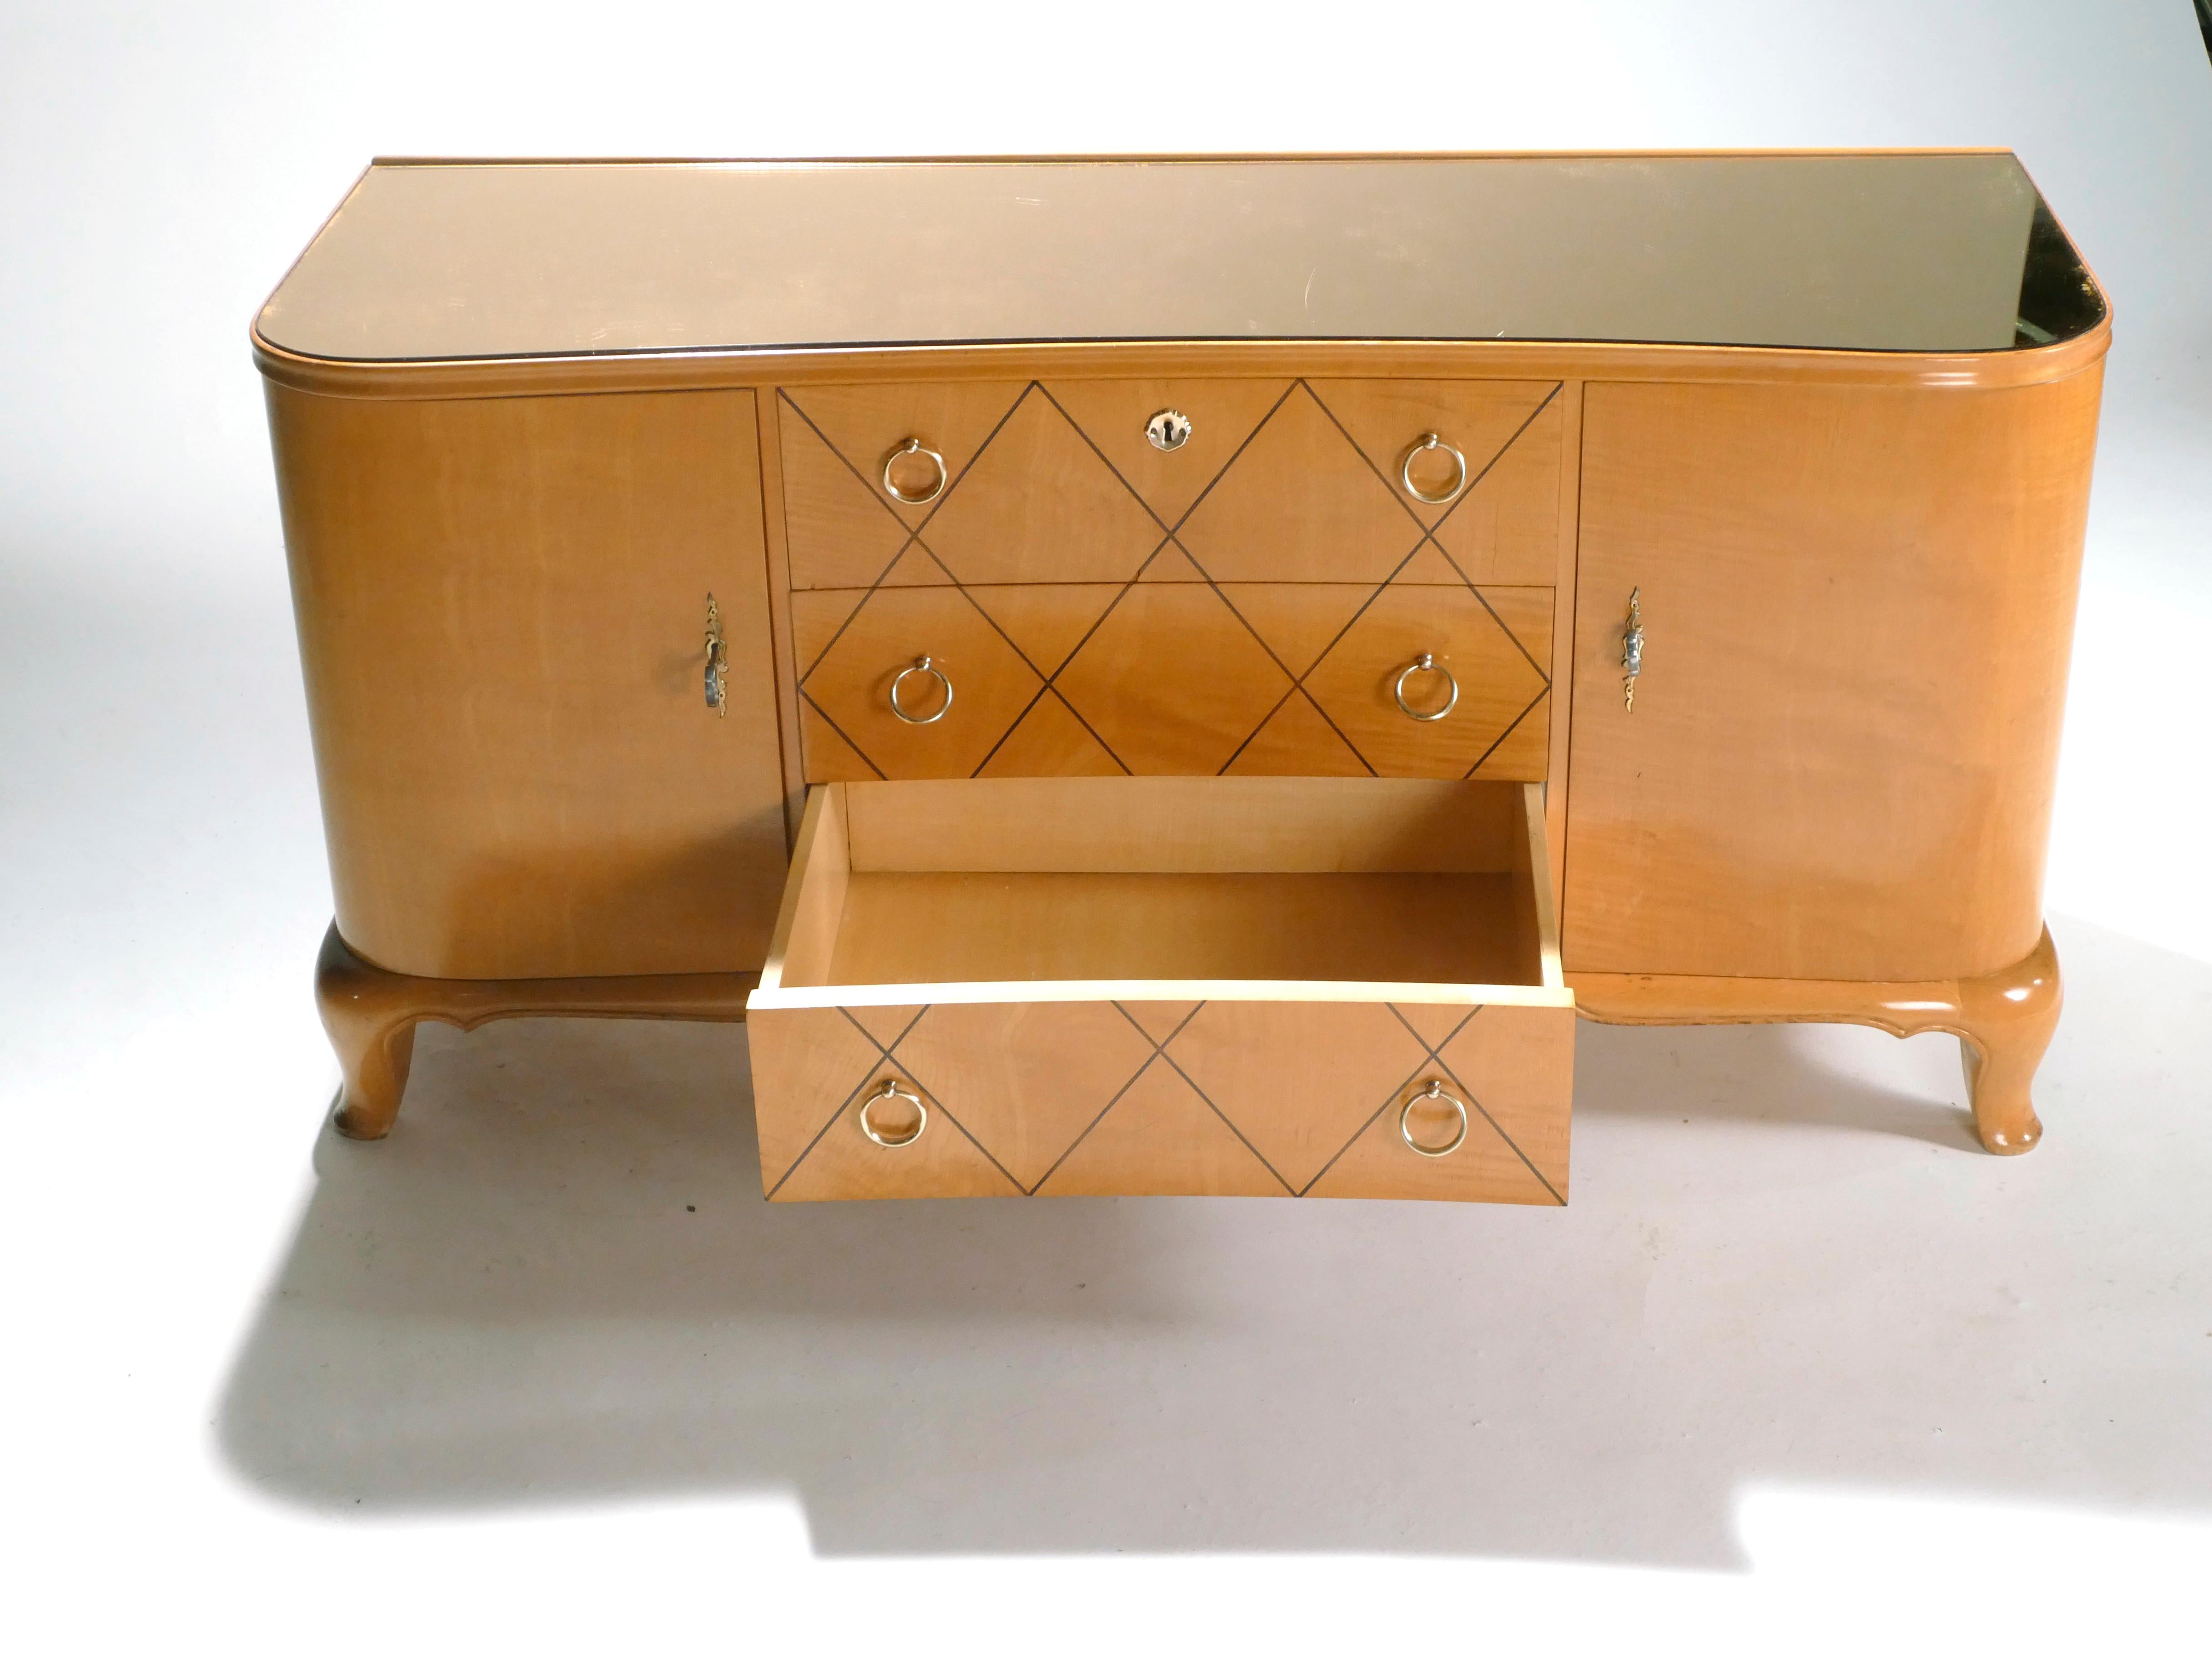 Midcentury René Prou Sycamore Brass Sideboard Commode, 1940s (Mitte des 20. Jahrhunderts)